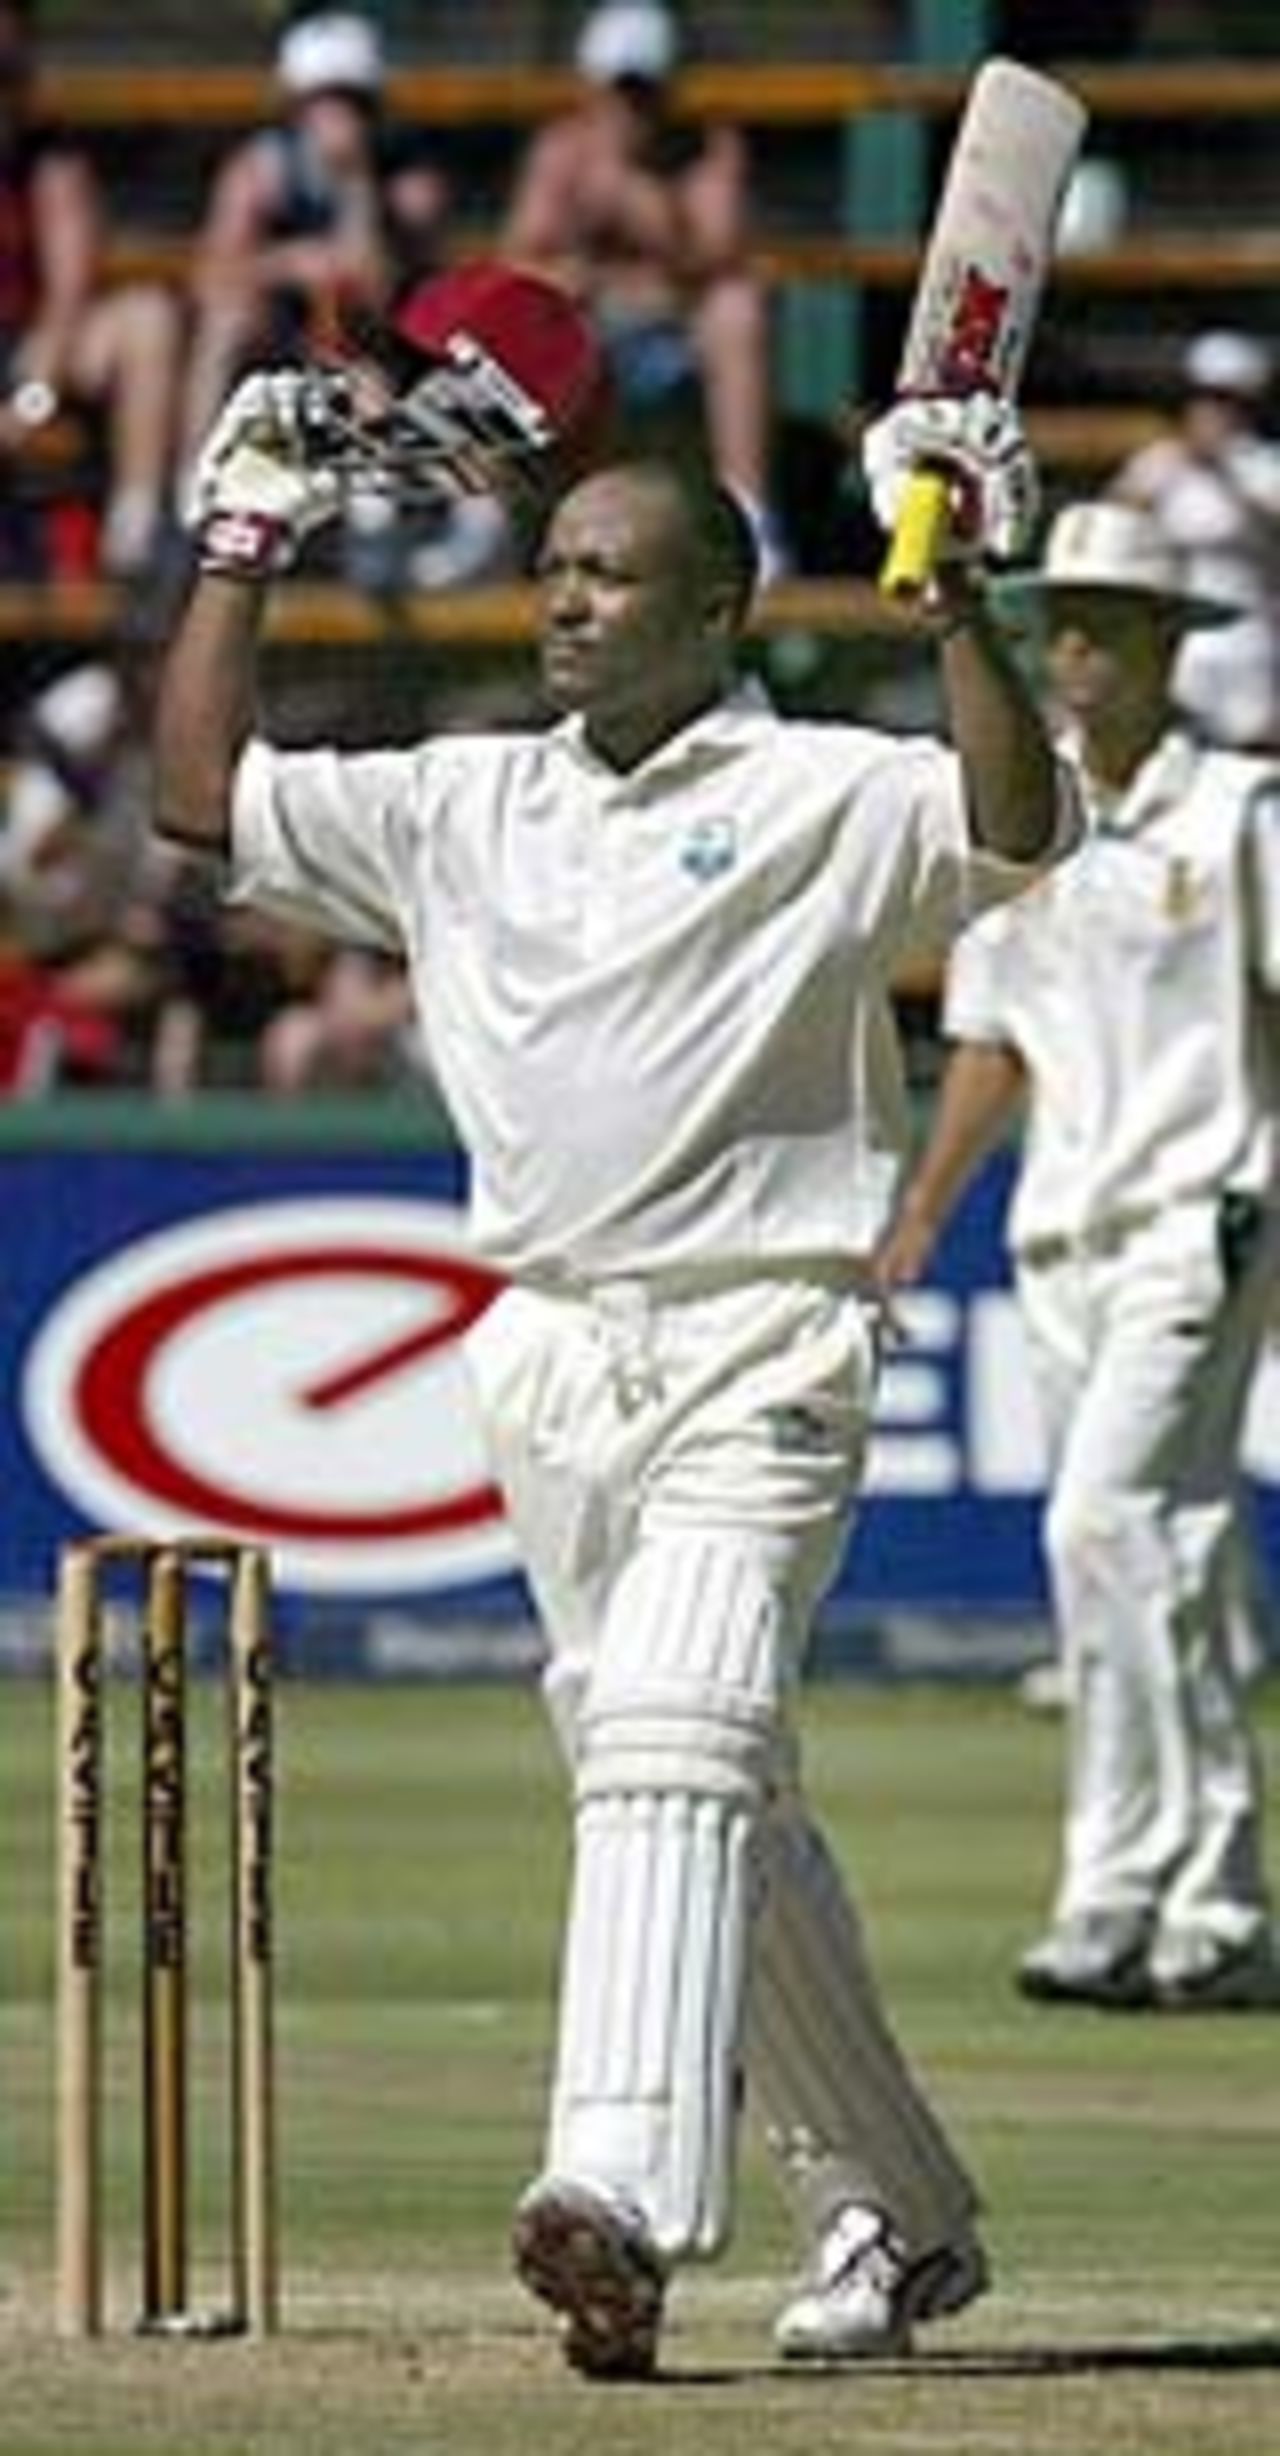 Brian Lara reaches his outstanding hundred - his 23rd in Tests and his first against South Africa, South Africa v West Indies, 1st Test, Johannesburg, December 14, 2003